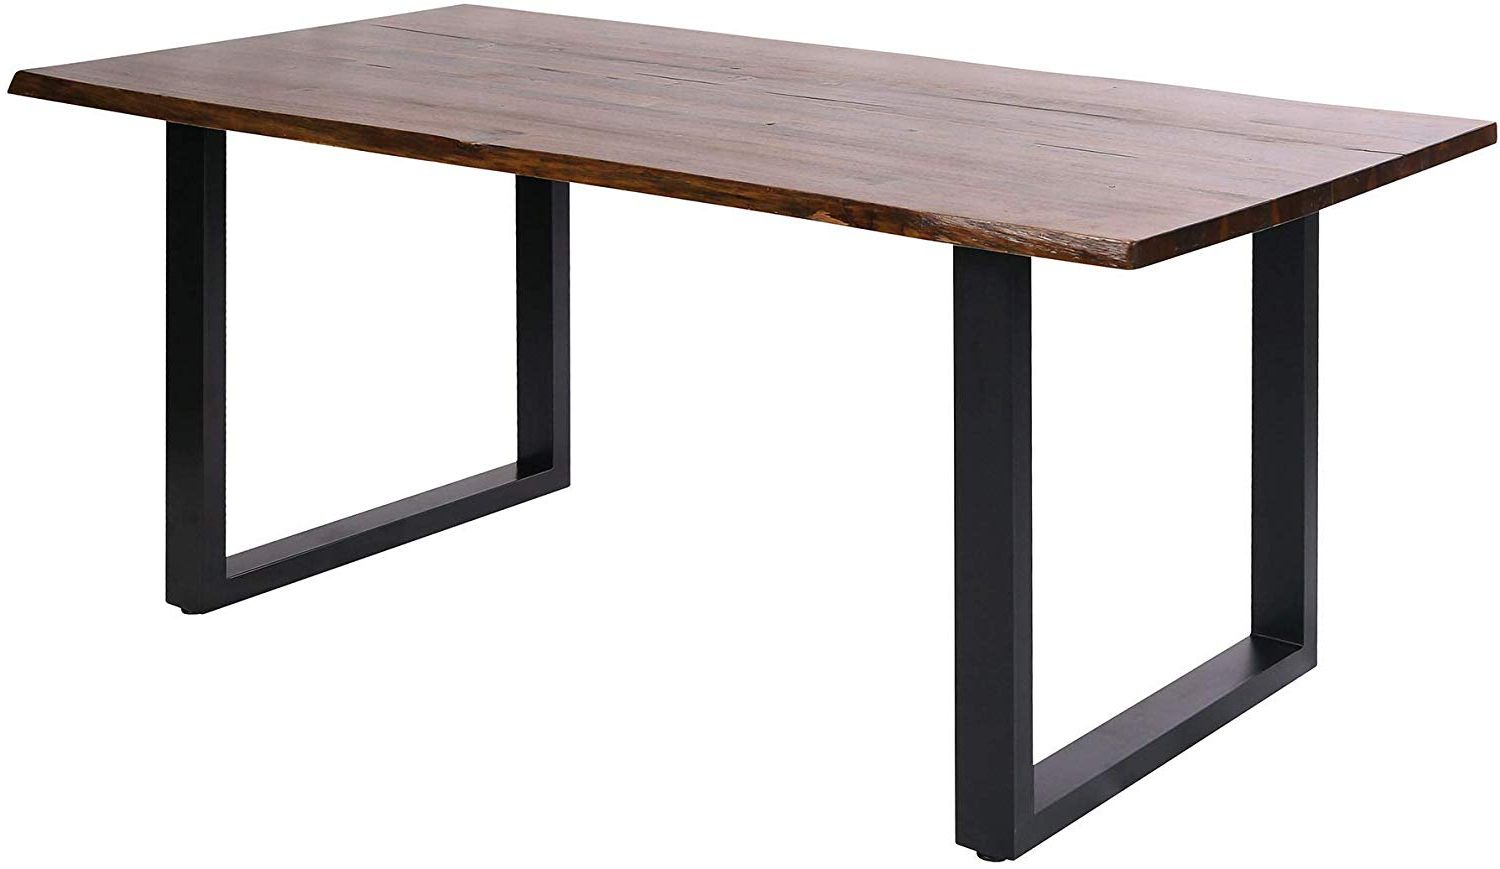 Amazon: Living Edge Dining Table In Natural Stain And Within Recent Acacia Dining Tables With Black X Leg (View 10 of 30)